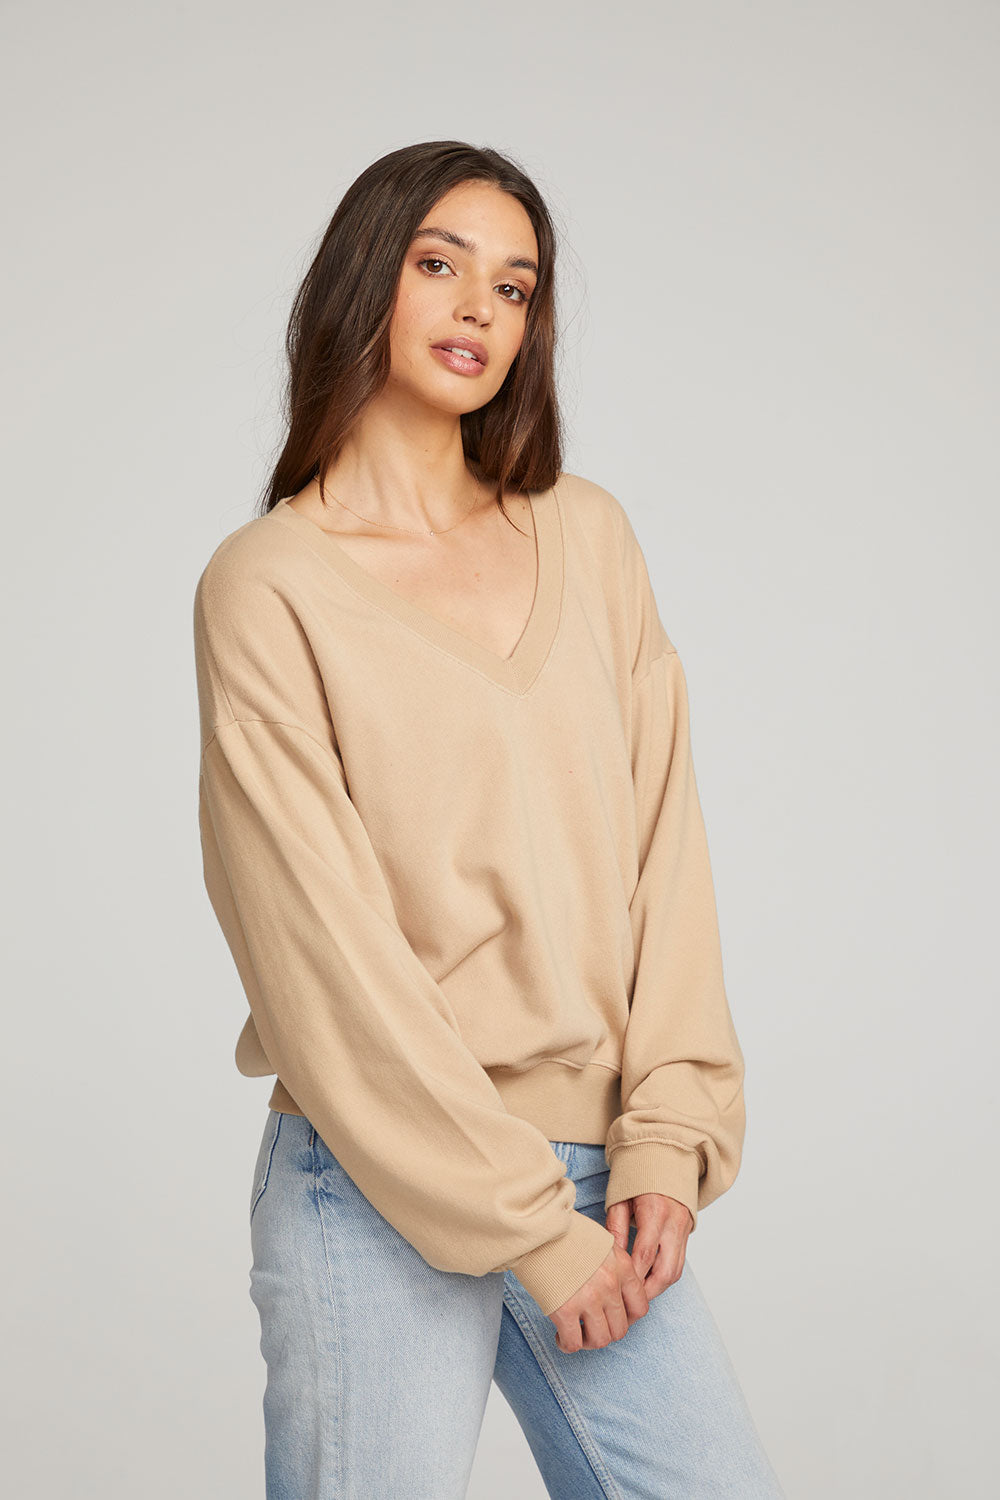 Poppy Cappuccino Pullover WOMENS chaserbrand